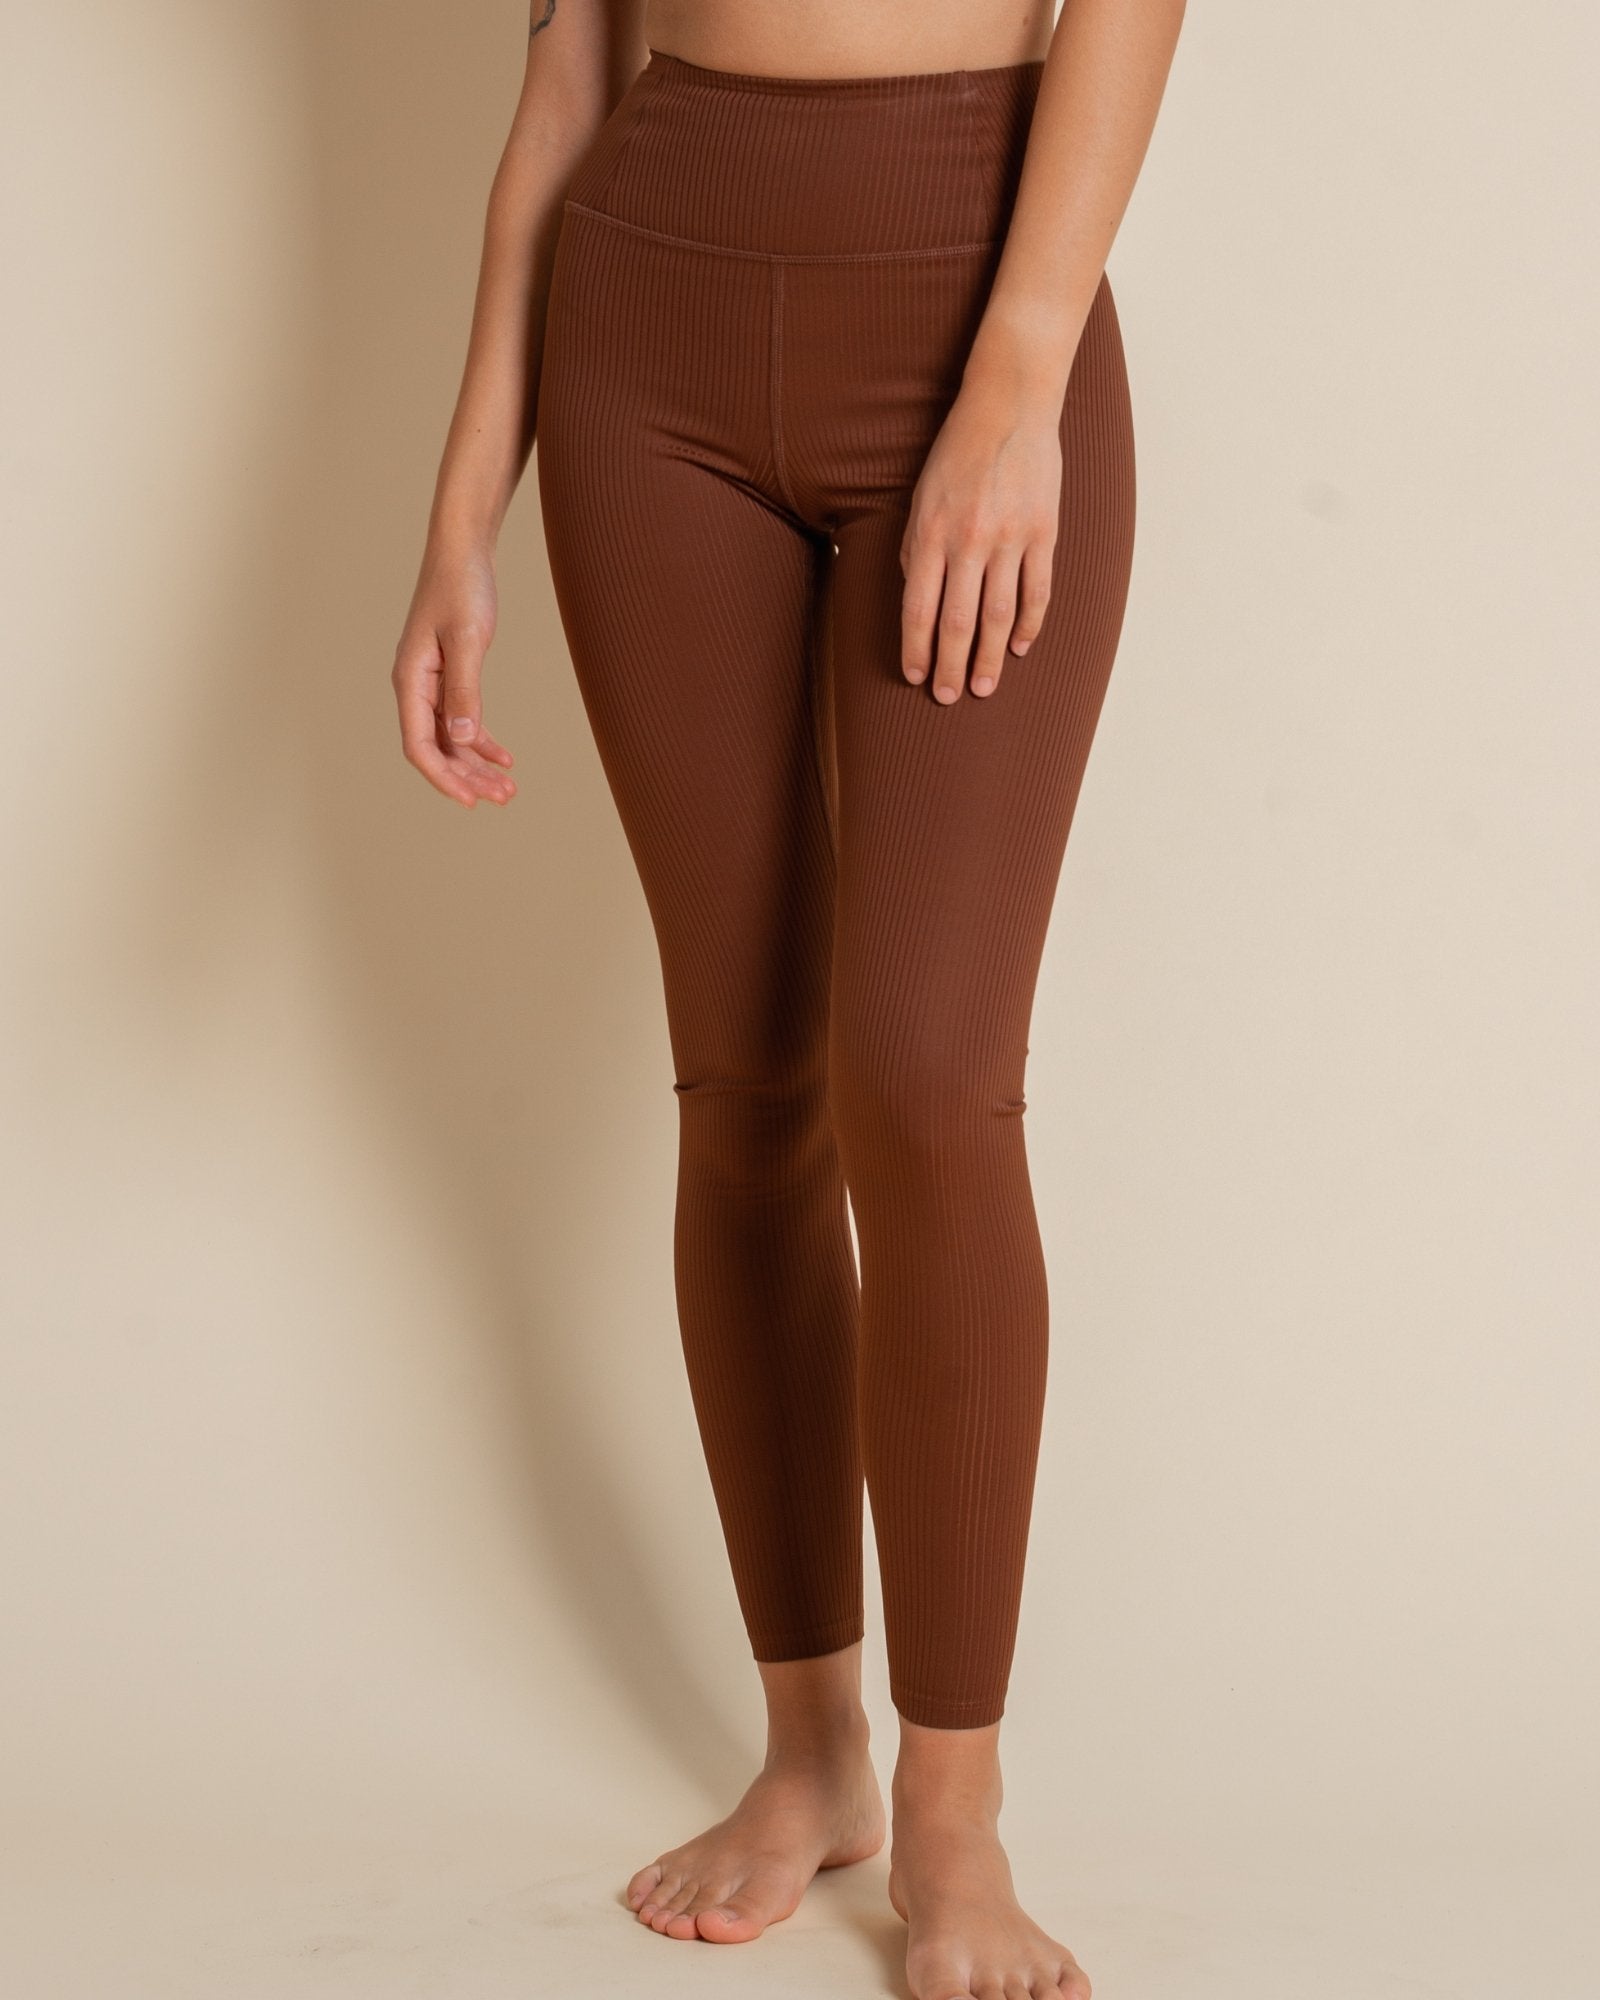 Rib High Rise 28.5 Legging from Girlfriend Collective. Discover  ethically-made, sustainable fashion at OAT & OCHRE. Our slow fashion  collections features organic cotton and timeless designs. Shop now for  classic, minimal styles.